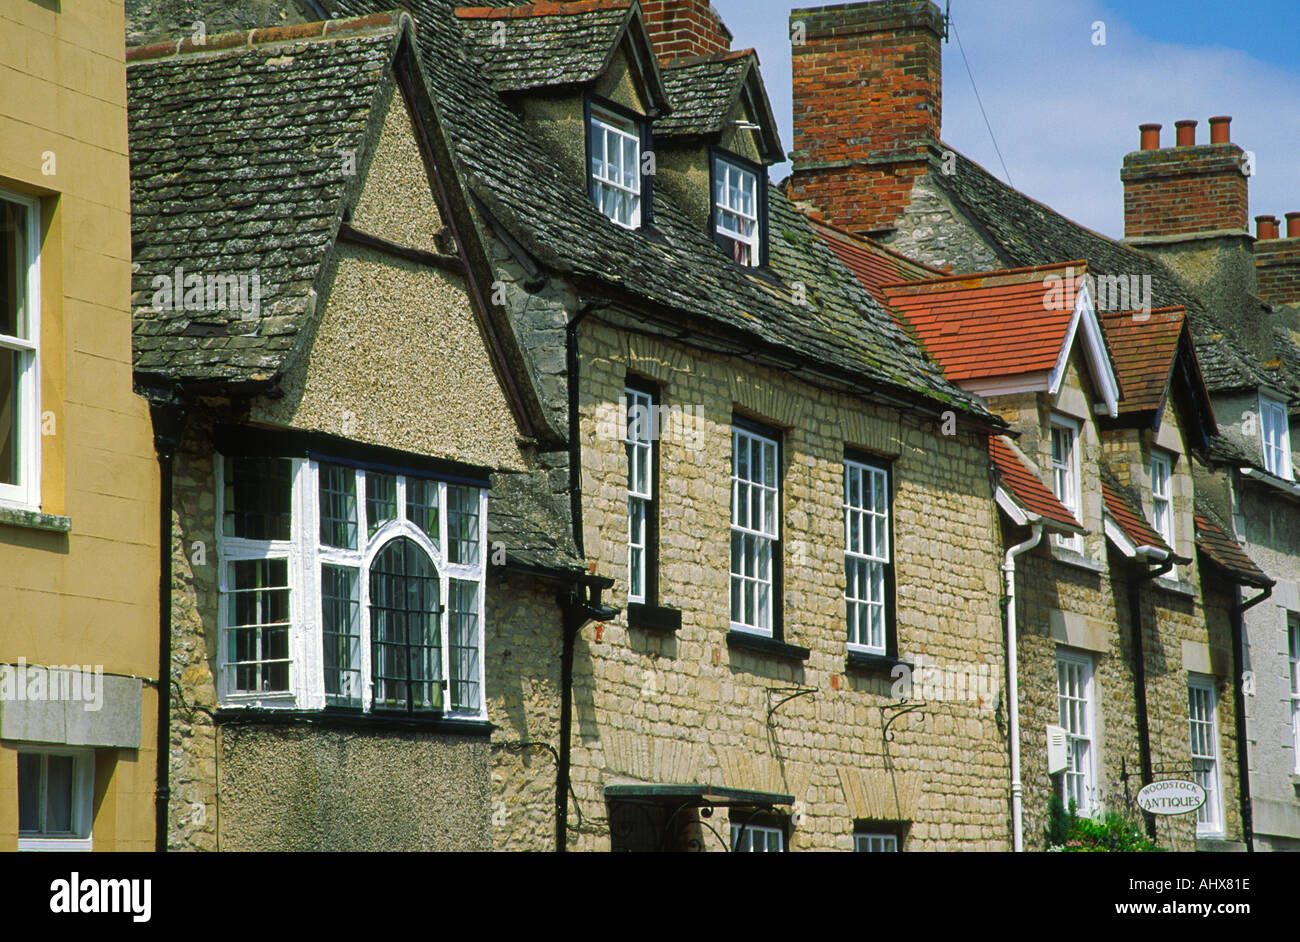 Stone Cottages And Shops Woodstock Oxfordshire Engalnd Stock Photo